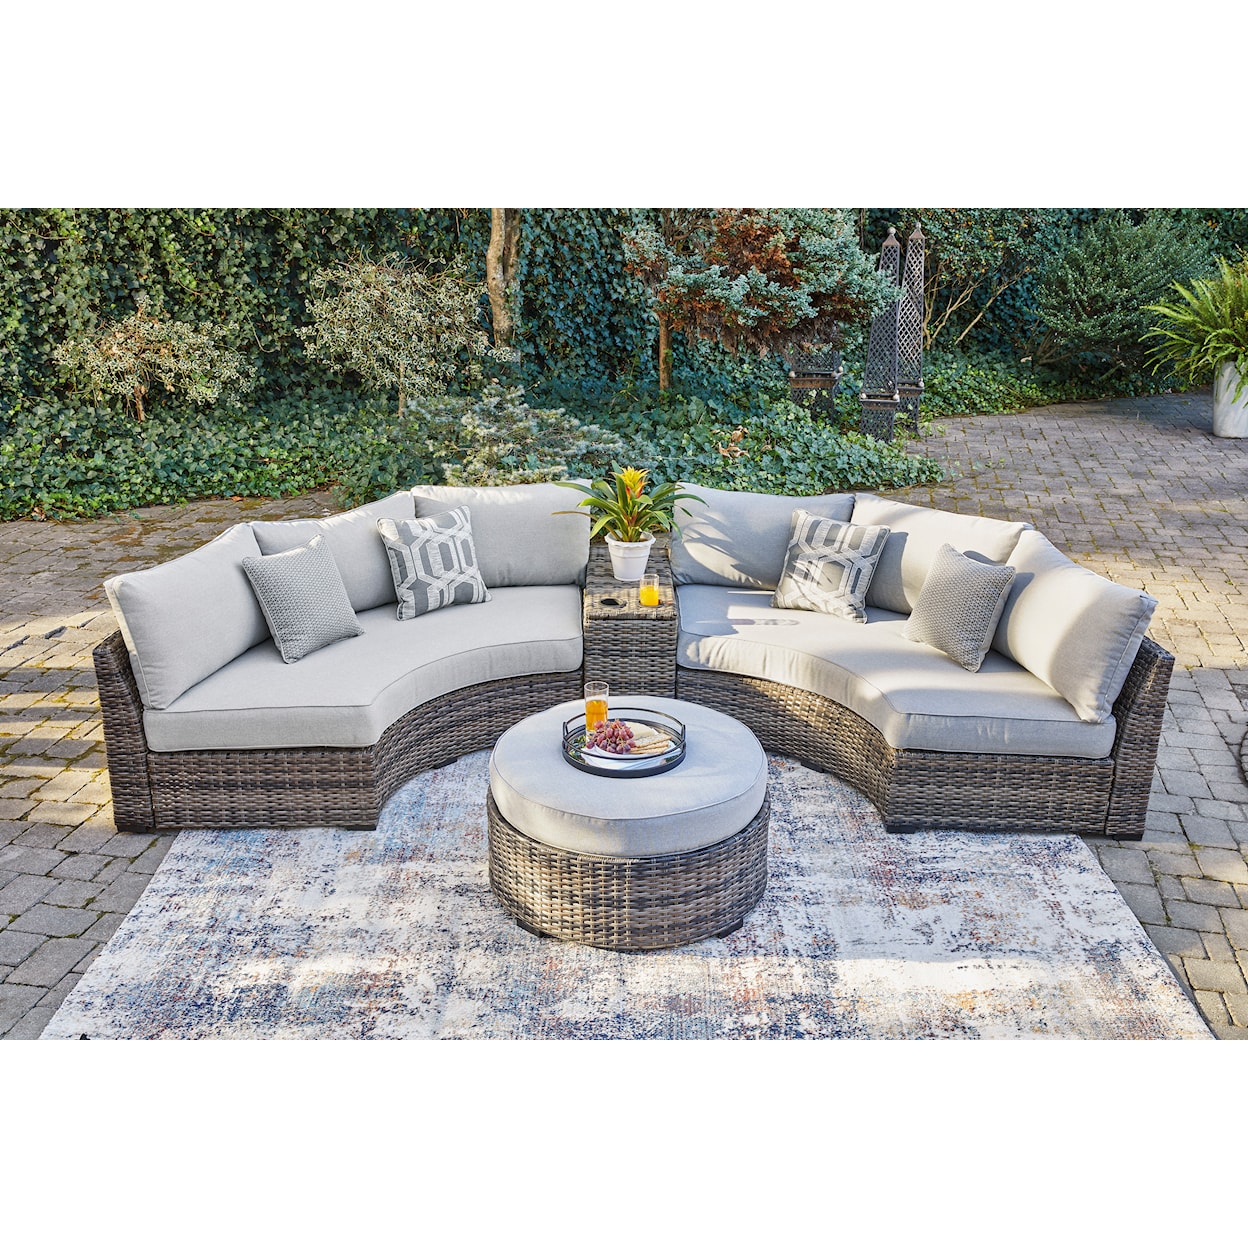 Signature Design by Ashley Harbor Court 3-Piece Outdoor Sectional